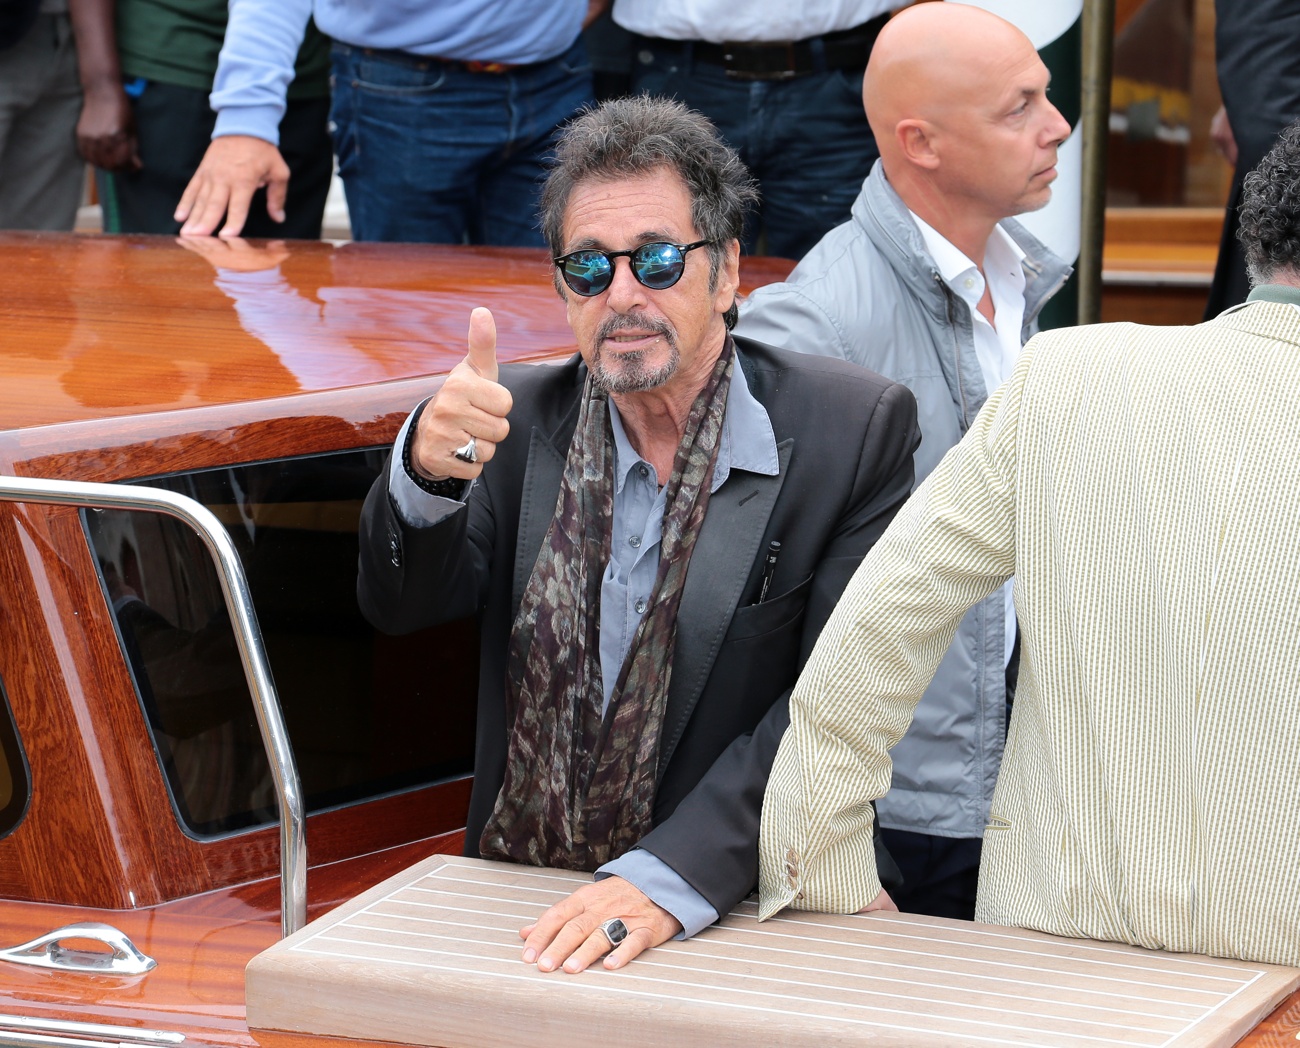 22 years after his last child, Al Pacino is expecting his fourth offspring